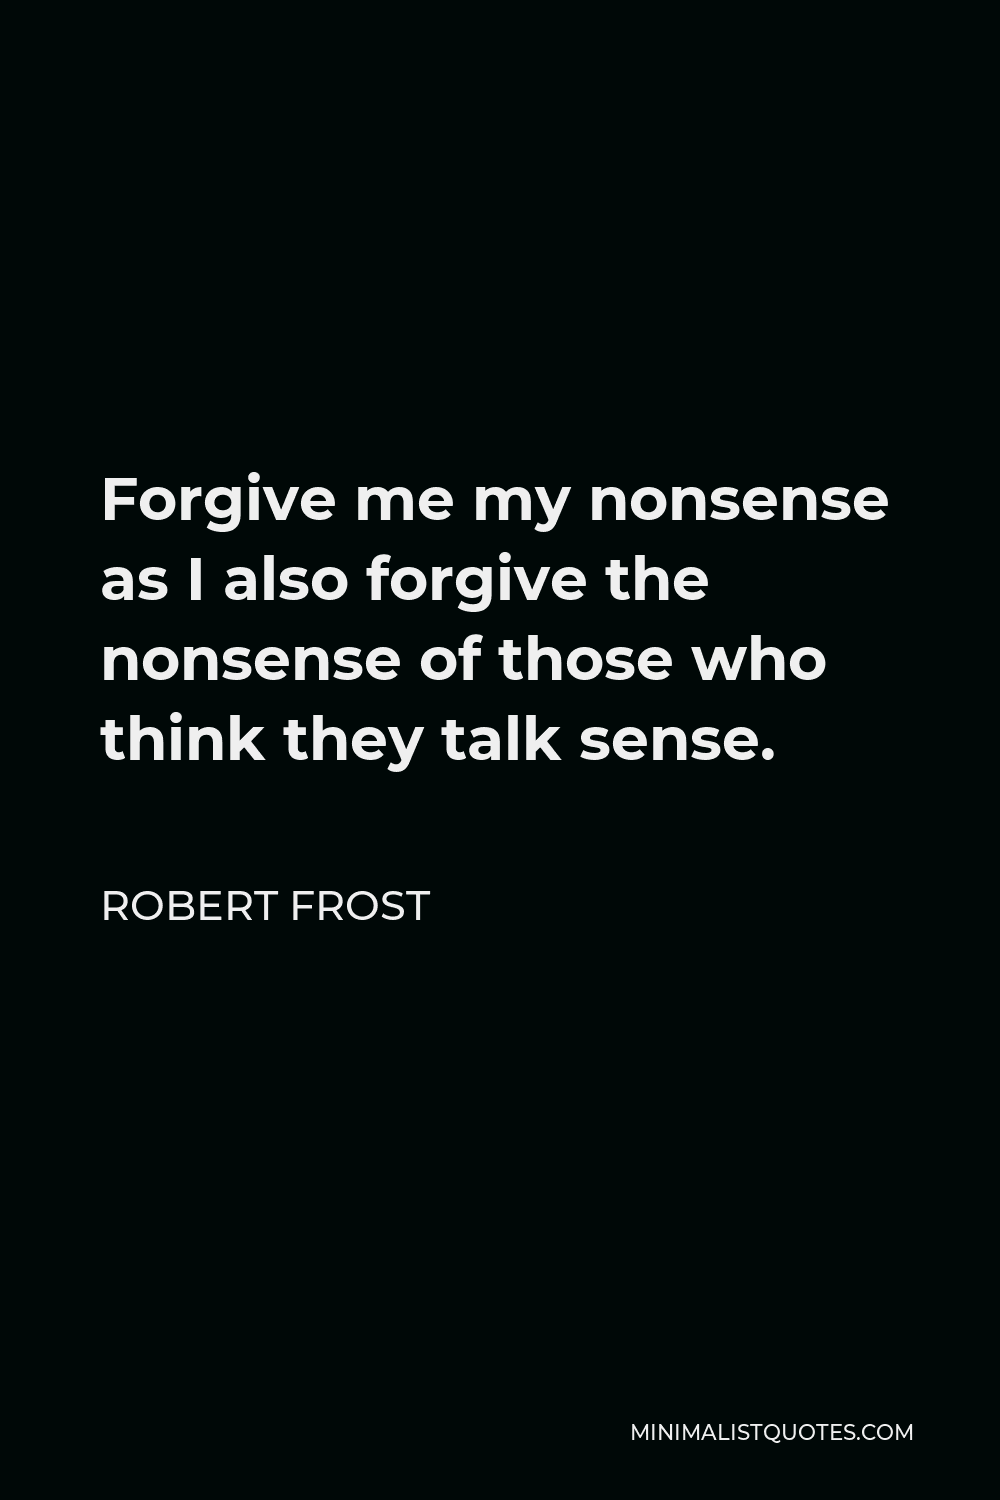 Robert Frost Quote - Forgive me my nonsense as I also forgive the nonsense of those who think they talk sense.